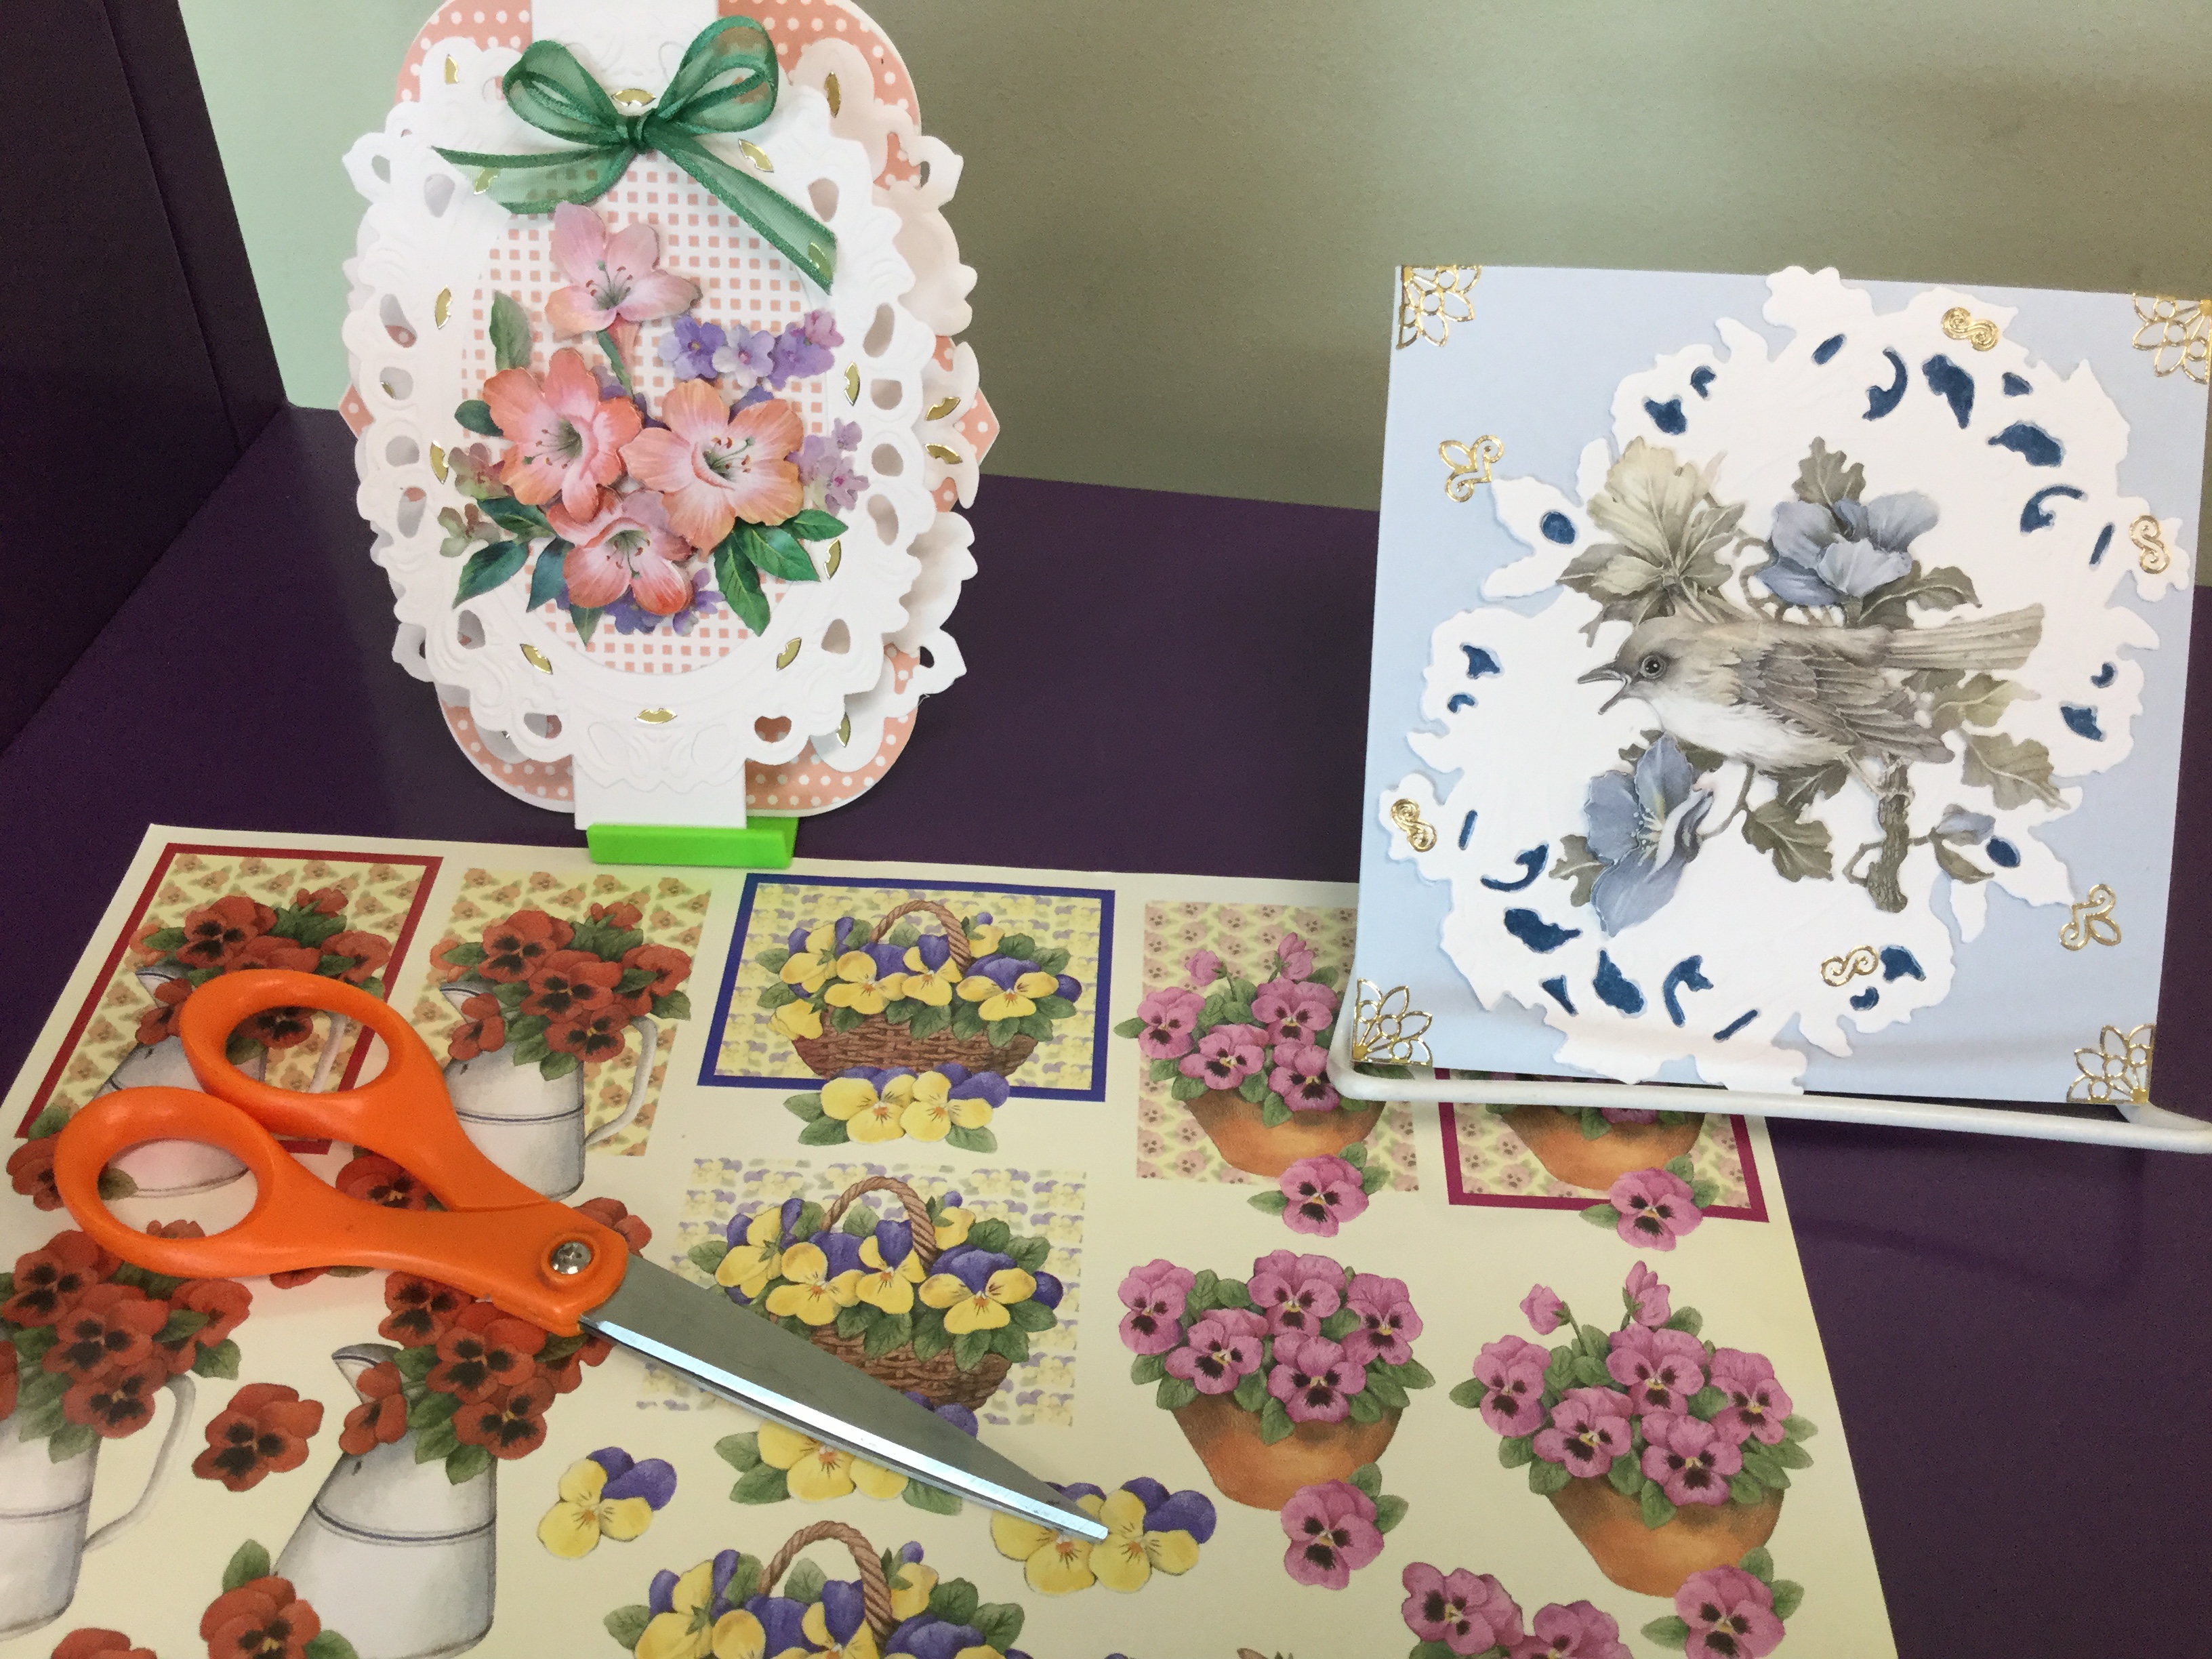 3D Decoupage Cards and image sheets